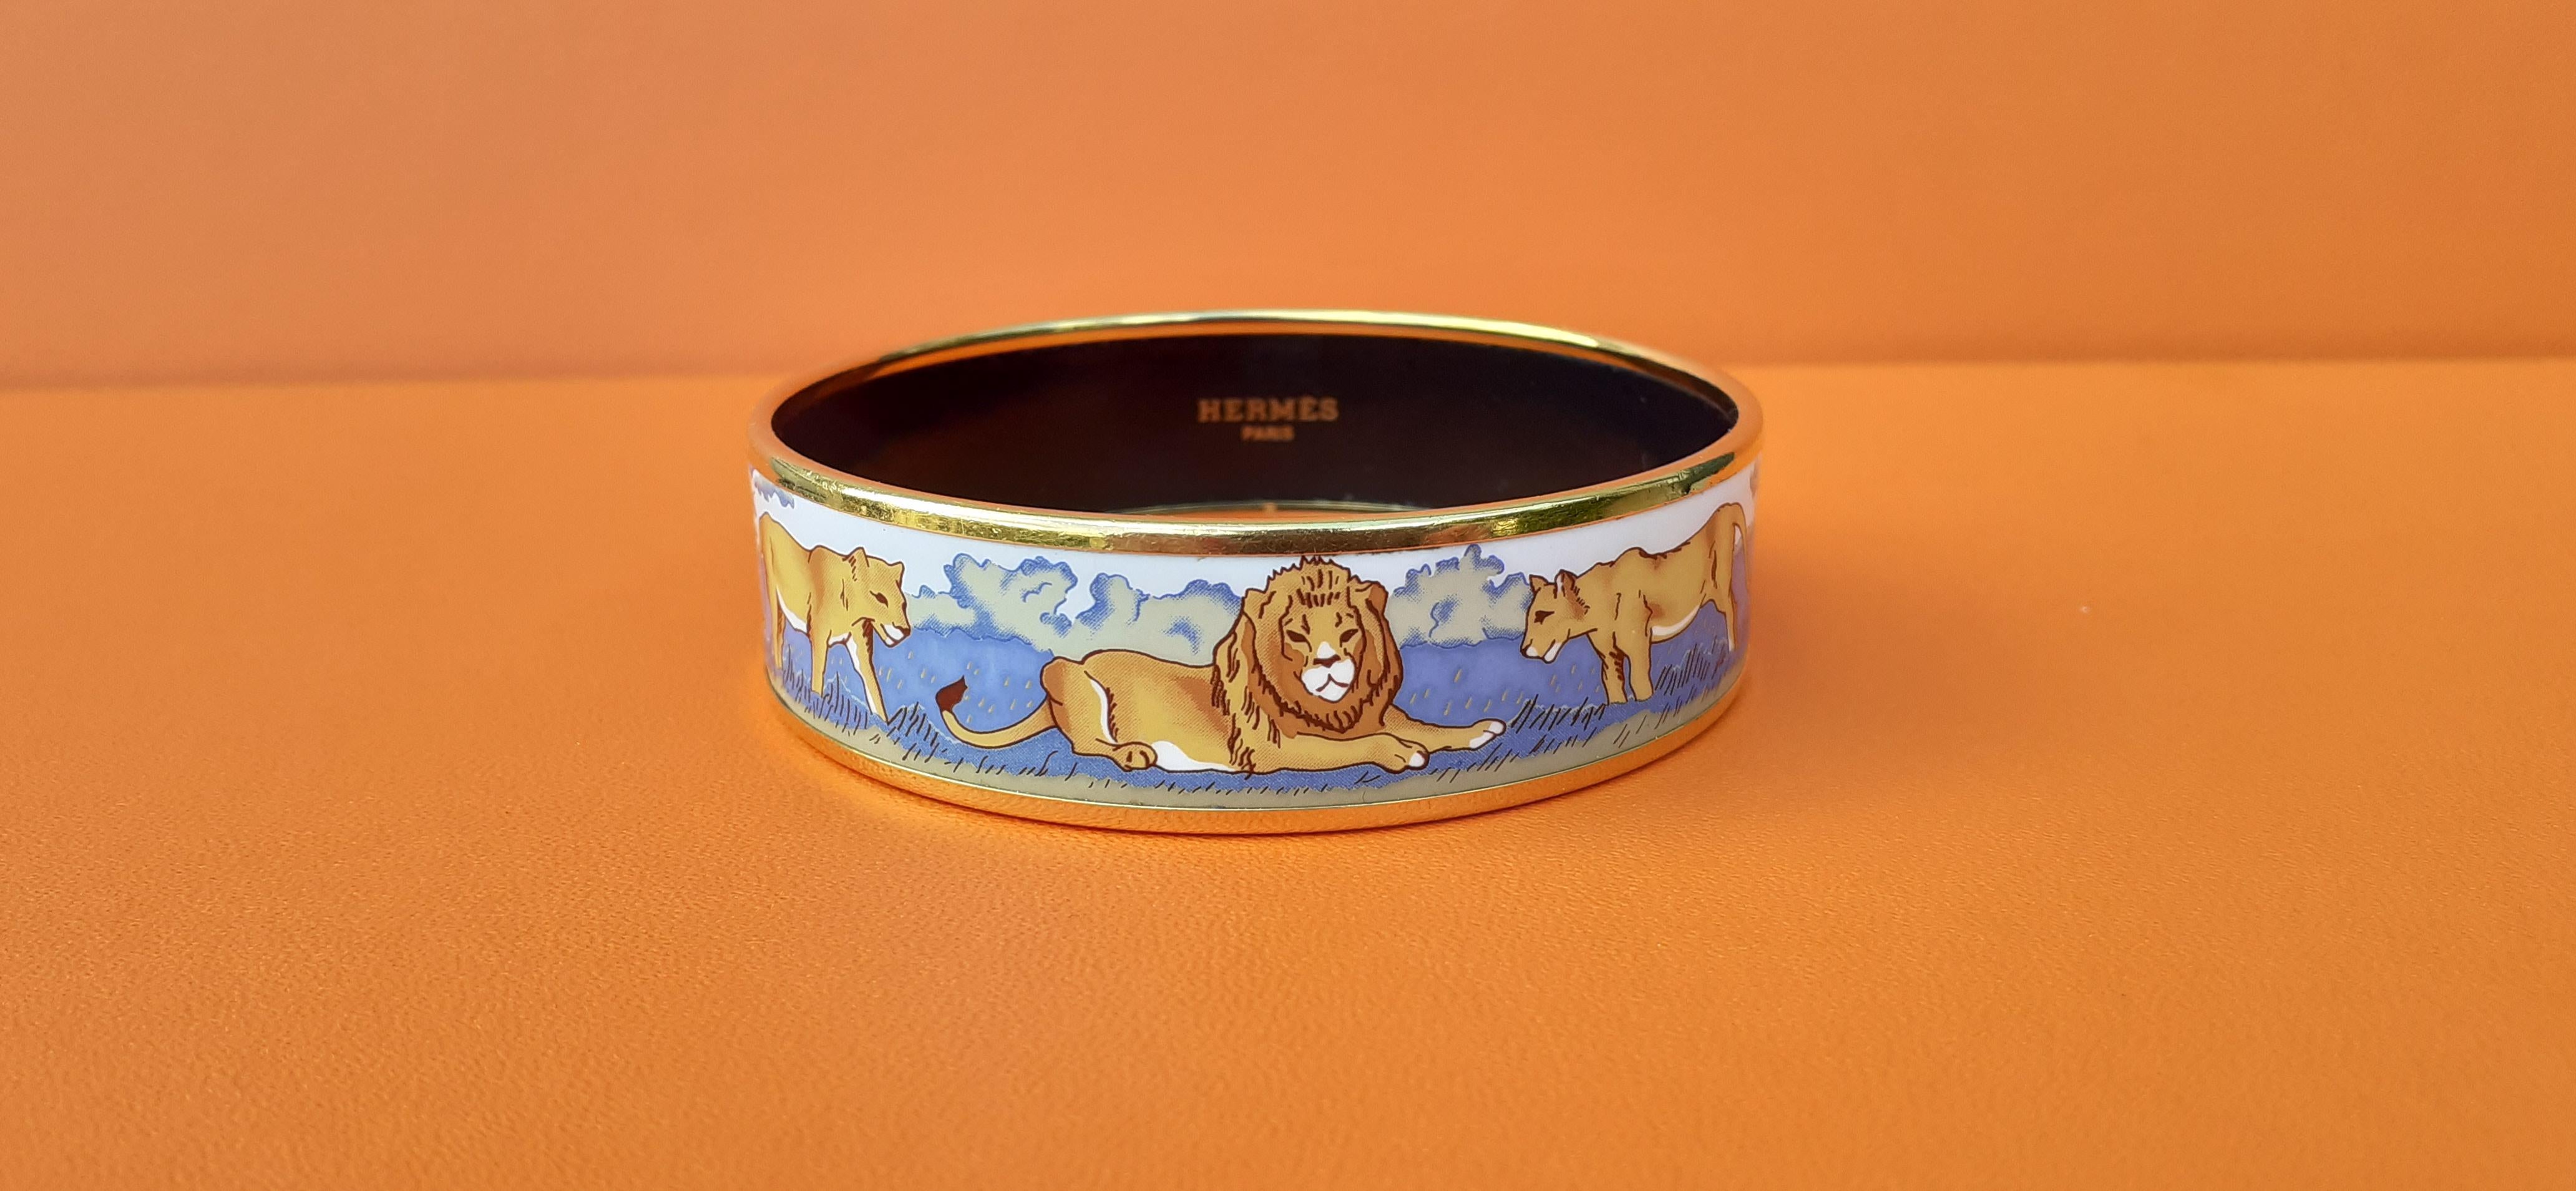 Gorgeous Authentic Hermès Bracelet

Pattern: Lions and Lionesses in Savannah

Rare and bautiful !

Made in Austria + C

Made of enamel printed and gold plated hardware

Colorways: White, Blue, Camel

